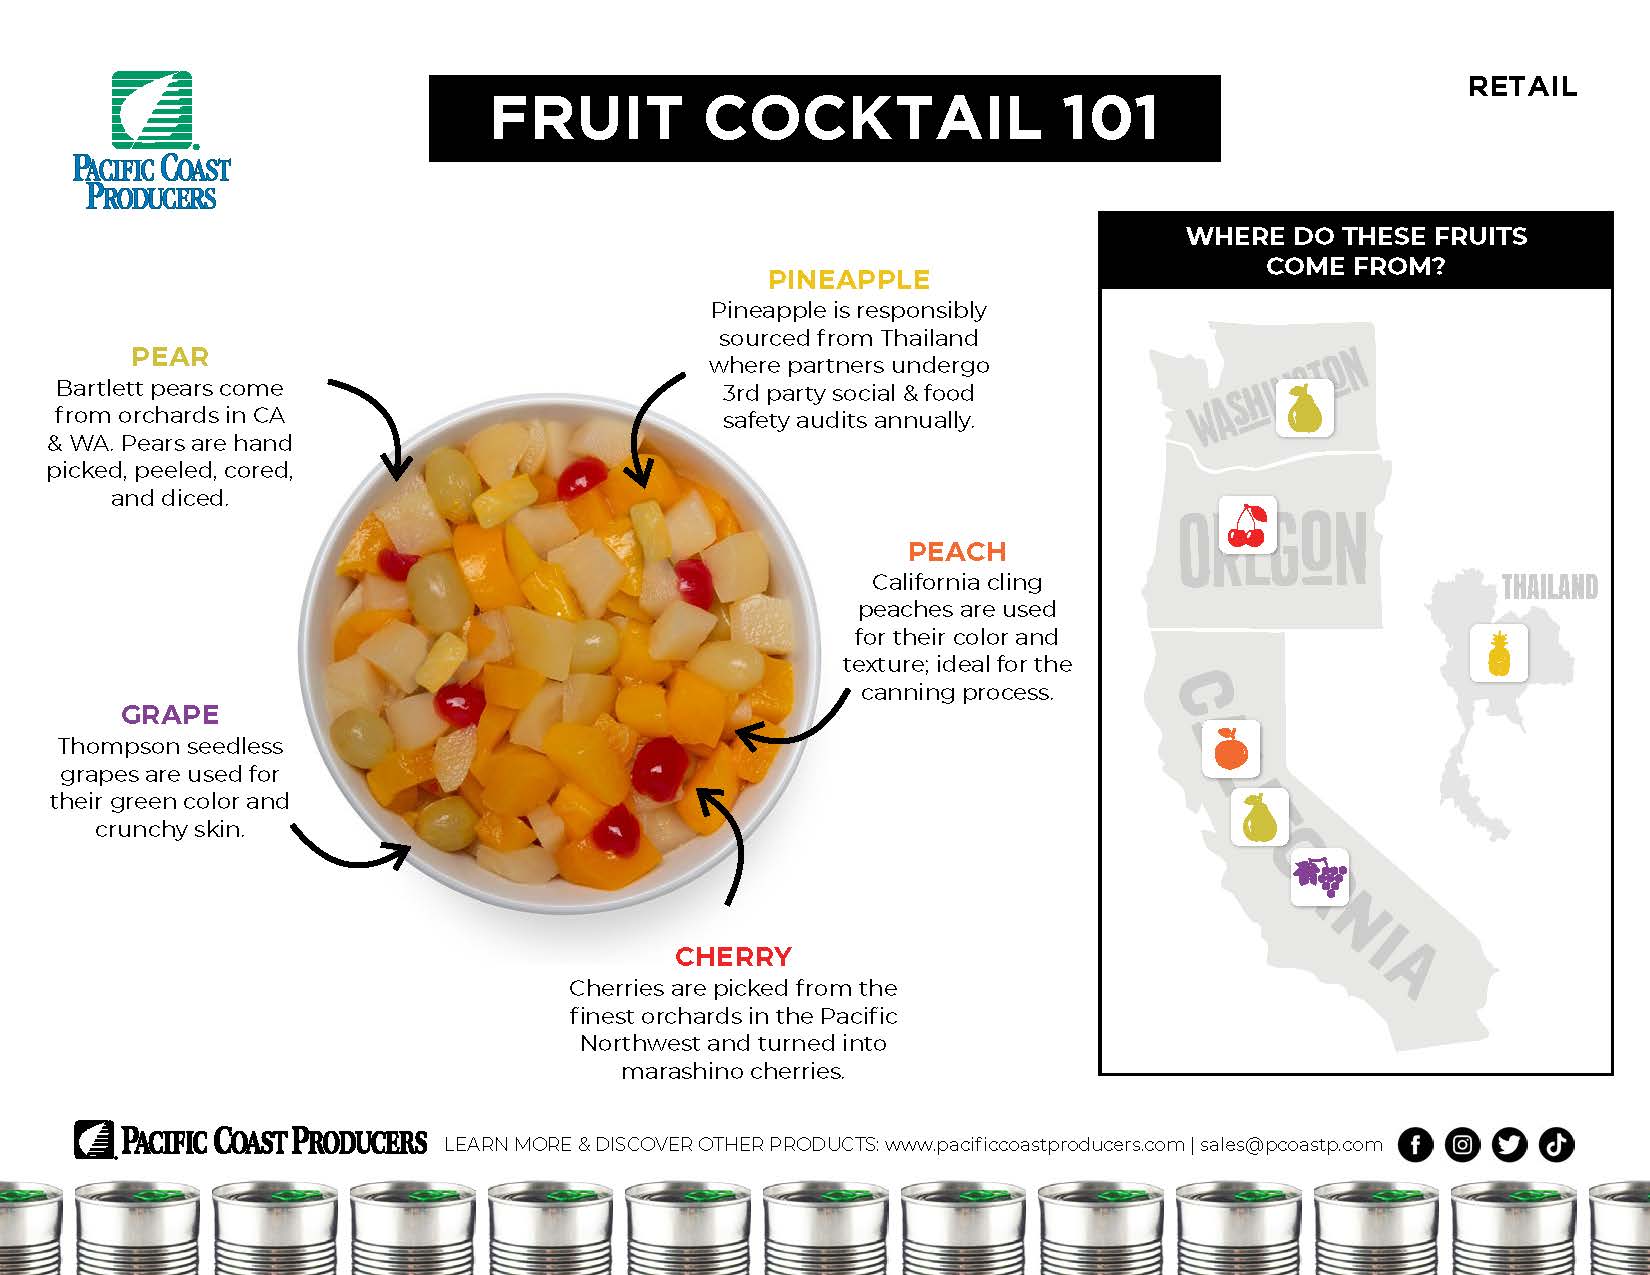 Fruit cocktail 101 infographic.